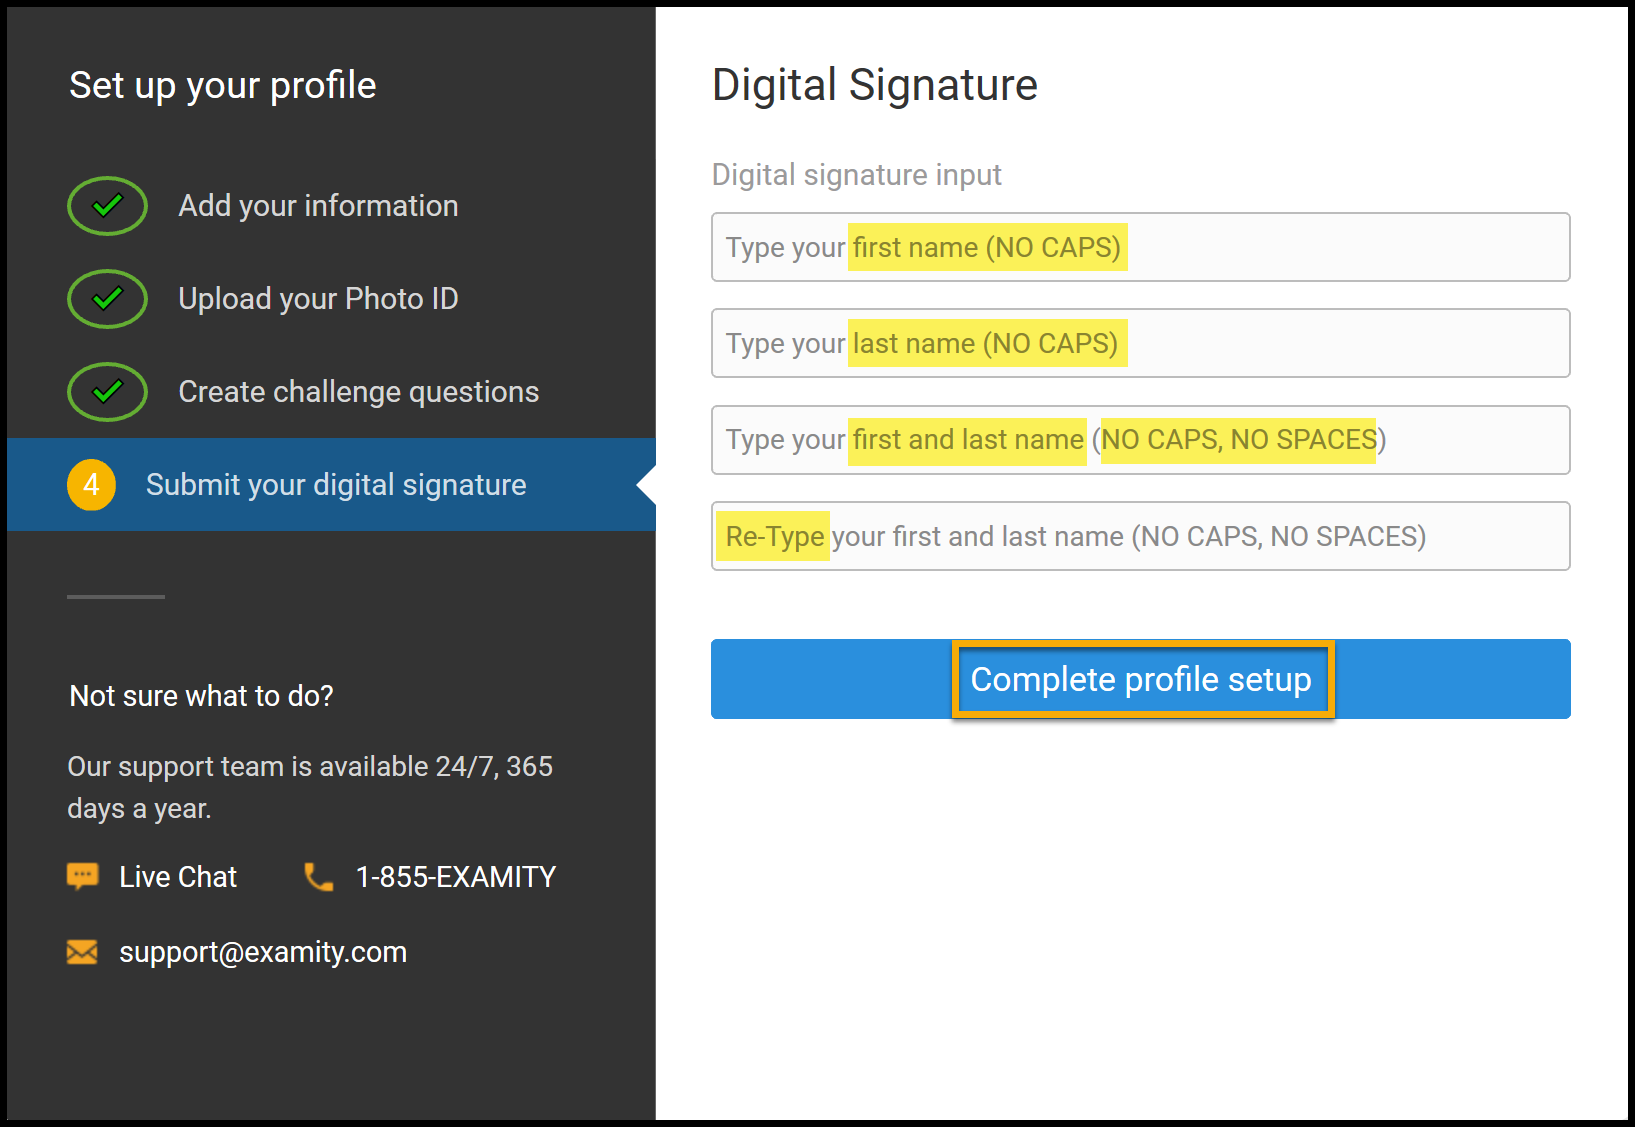 Digital signature using no caps to type first, last, first and last and repeat name. Complete profile setup highlighted to close.